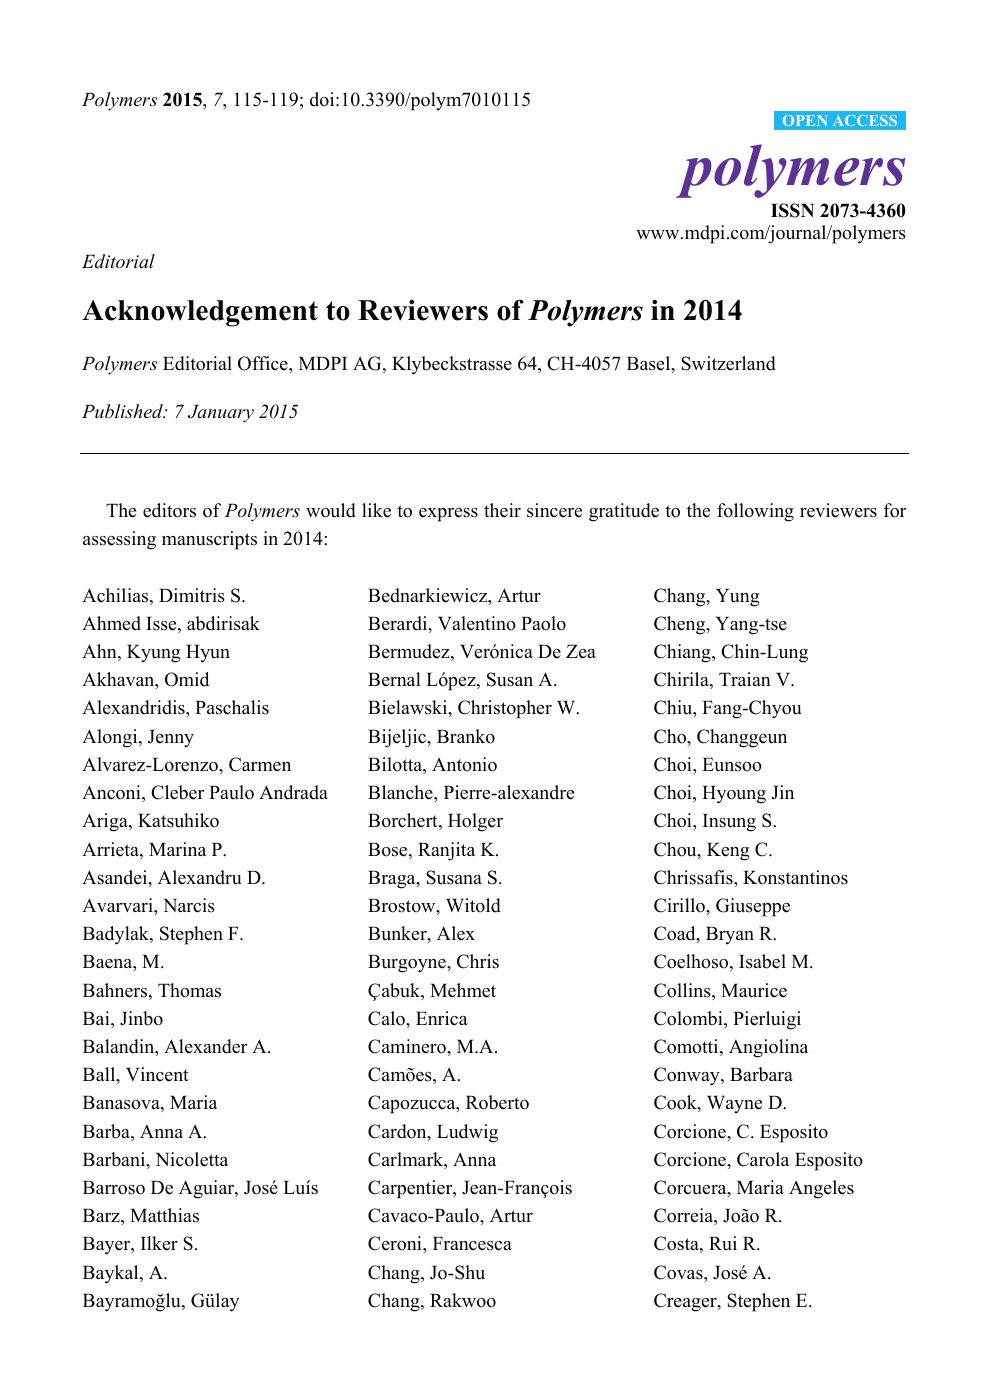 Reviewer acknowledgement 2013 – topic of research paper in Biological  sciences. Download scholarly article PDF and read for free on CyberLeninka  open science hub.